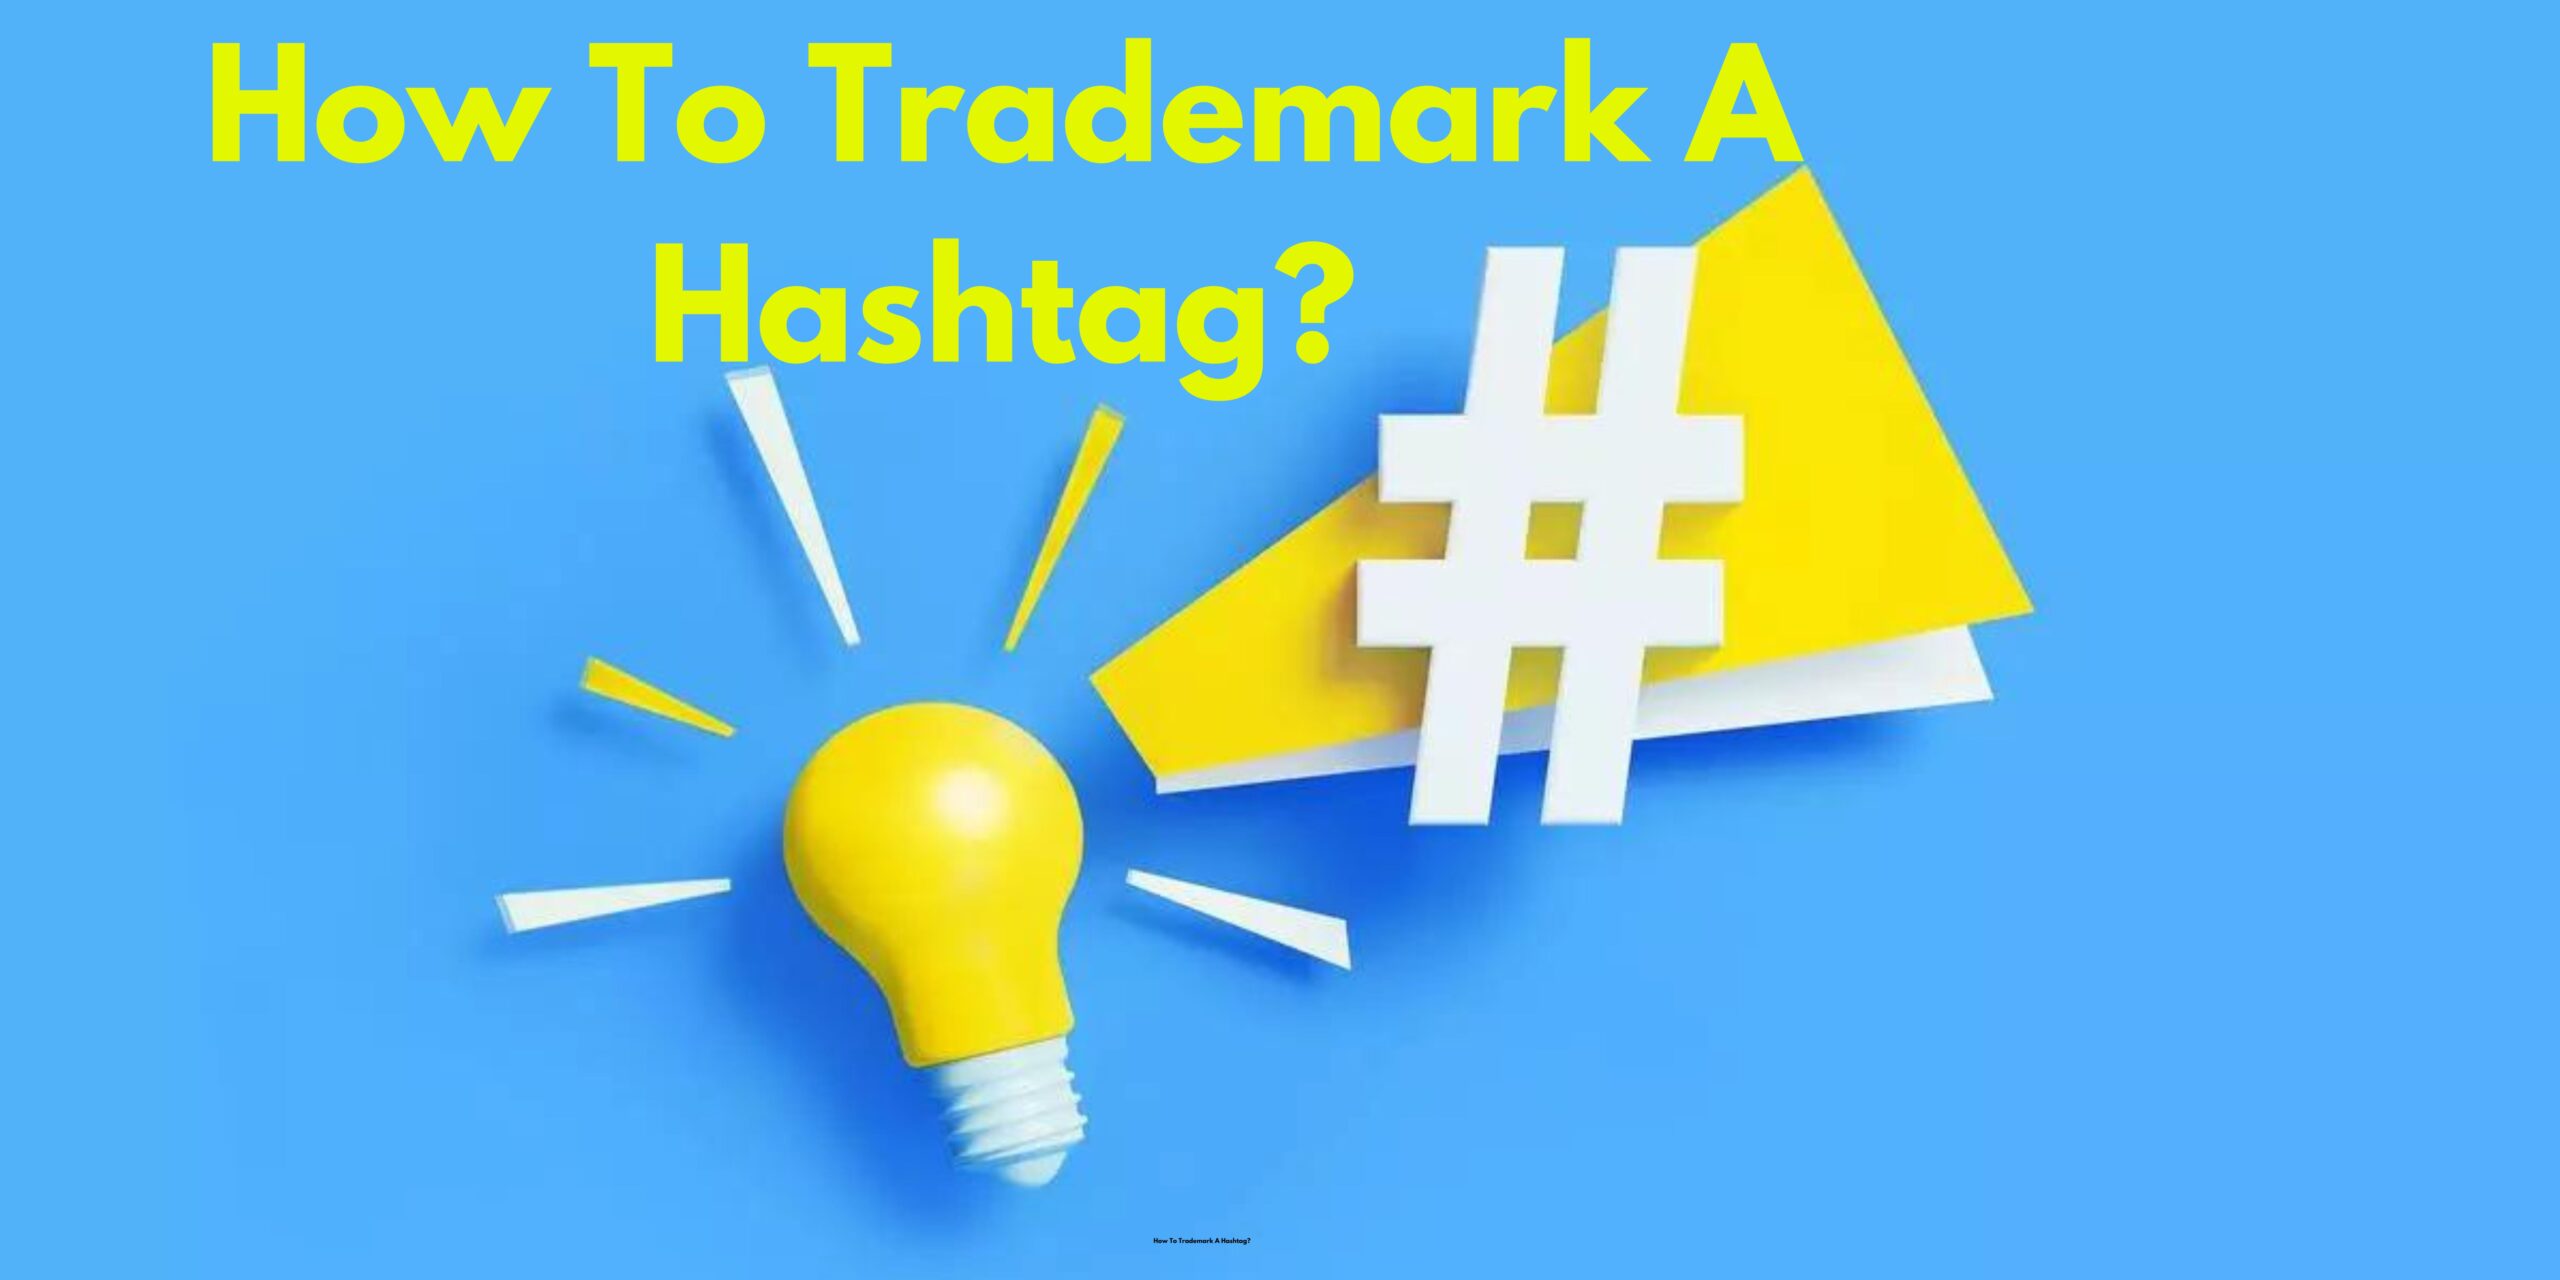 How To Trademark A Hashtag?